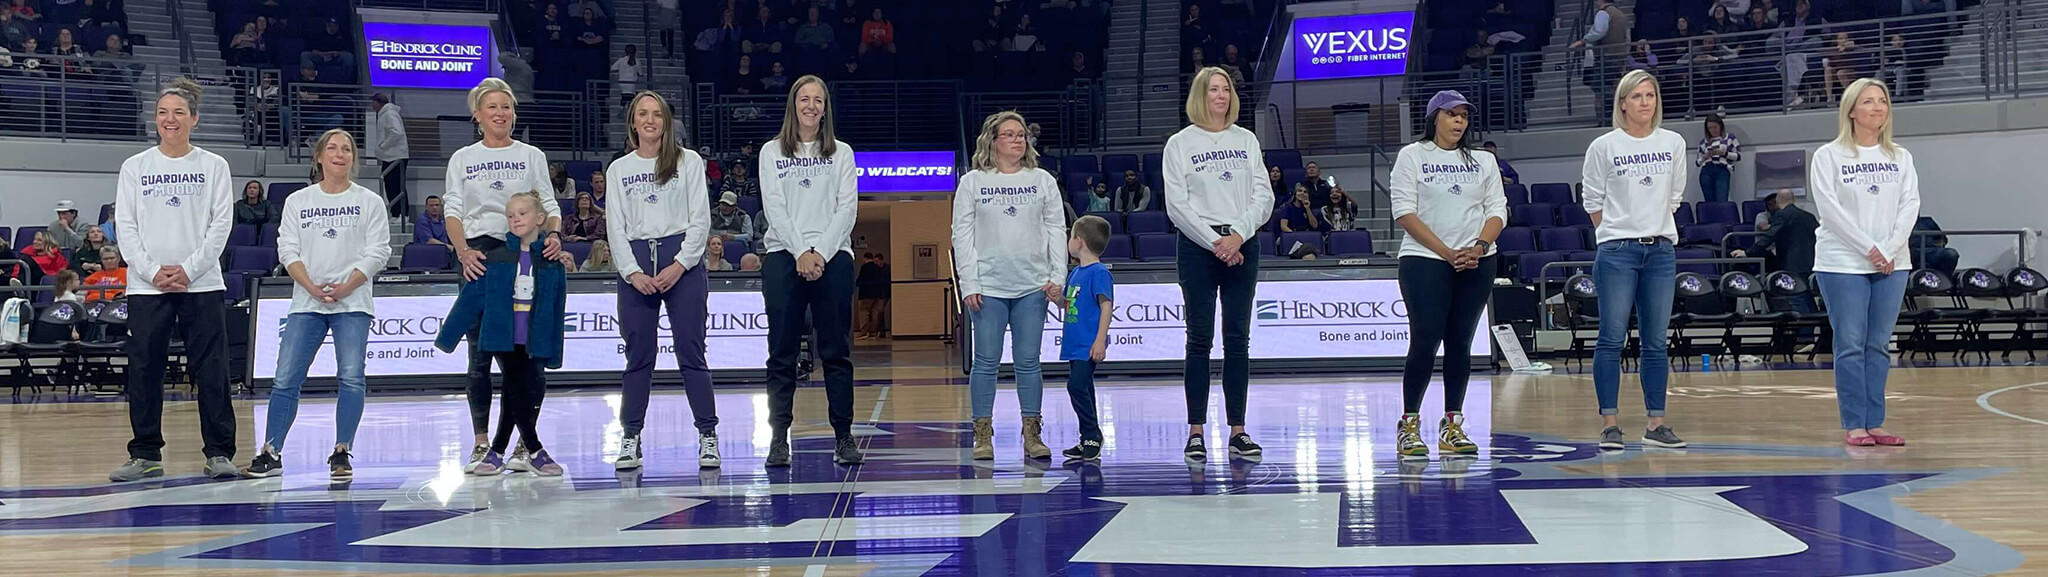 Participants in Wildcat Mentors were recognized at a recent game. From left are Brenda Andress, Jennifer Hogan, Allison Coil, Millie Goetz, Micky Brewer, Calli Cannon, Caren Christian, Andrea Jackson, Kendra Whitehead and Jennifer Johnson-Fernandez.